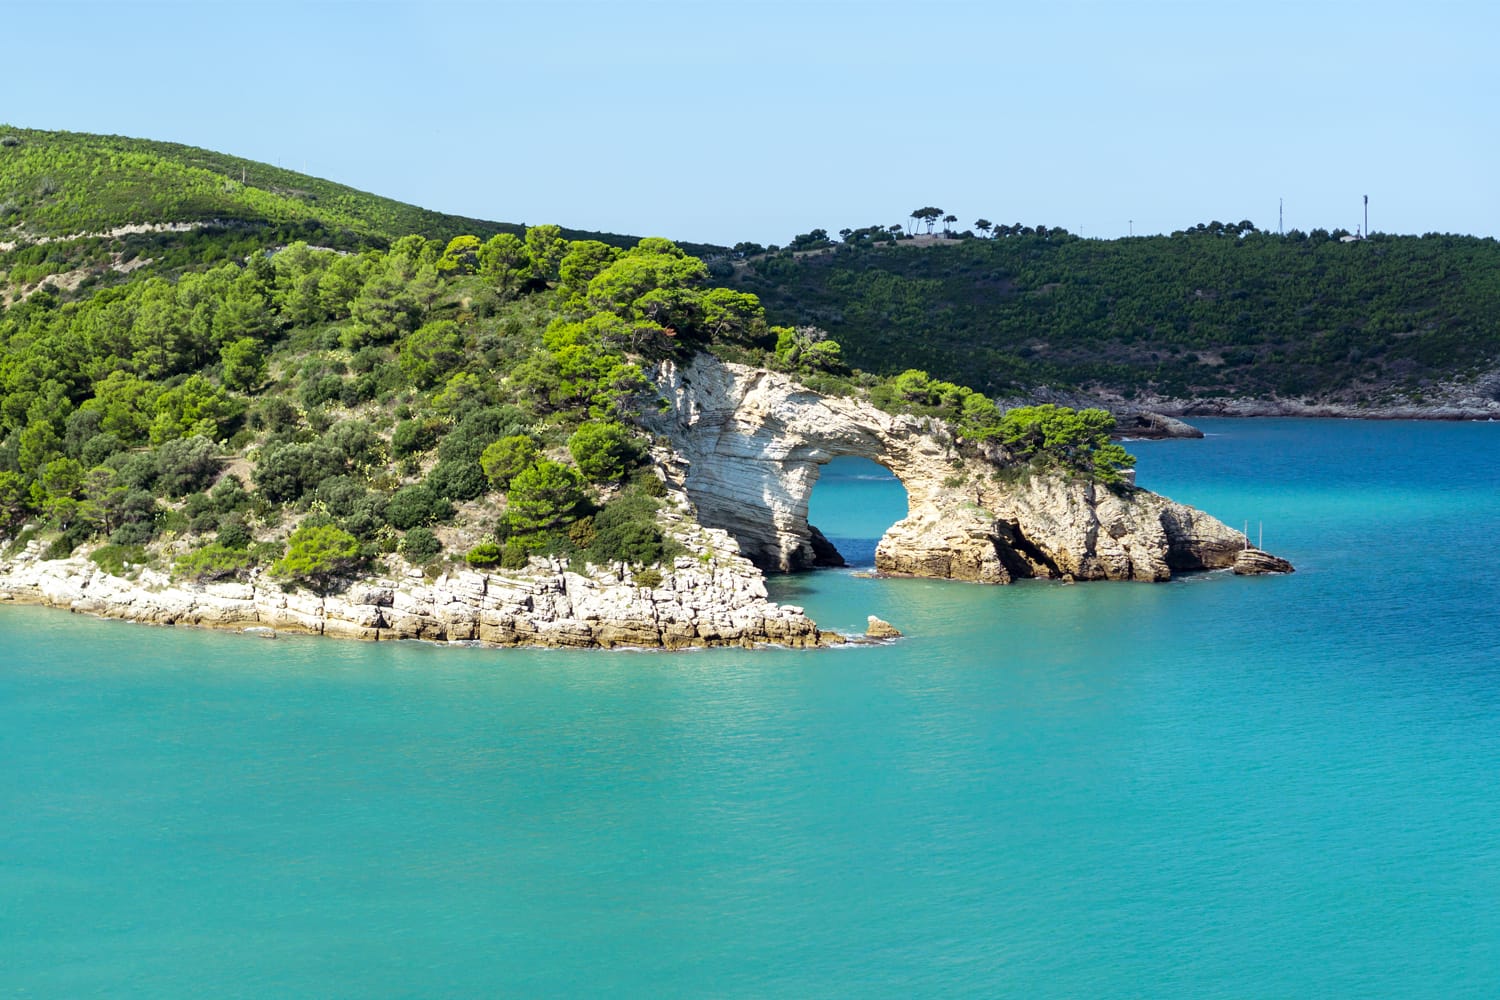 Panorama of Felice Arch located in Gargano National Park in Italy